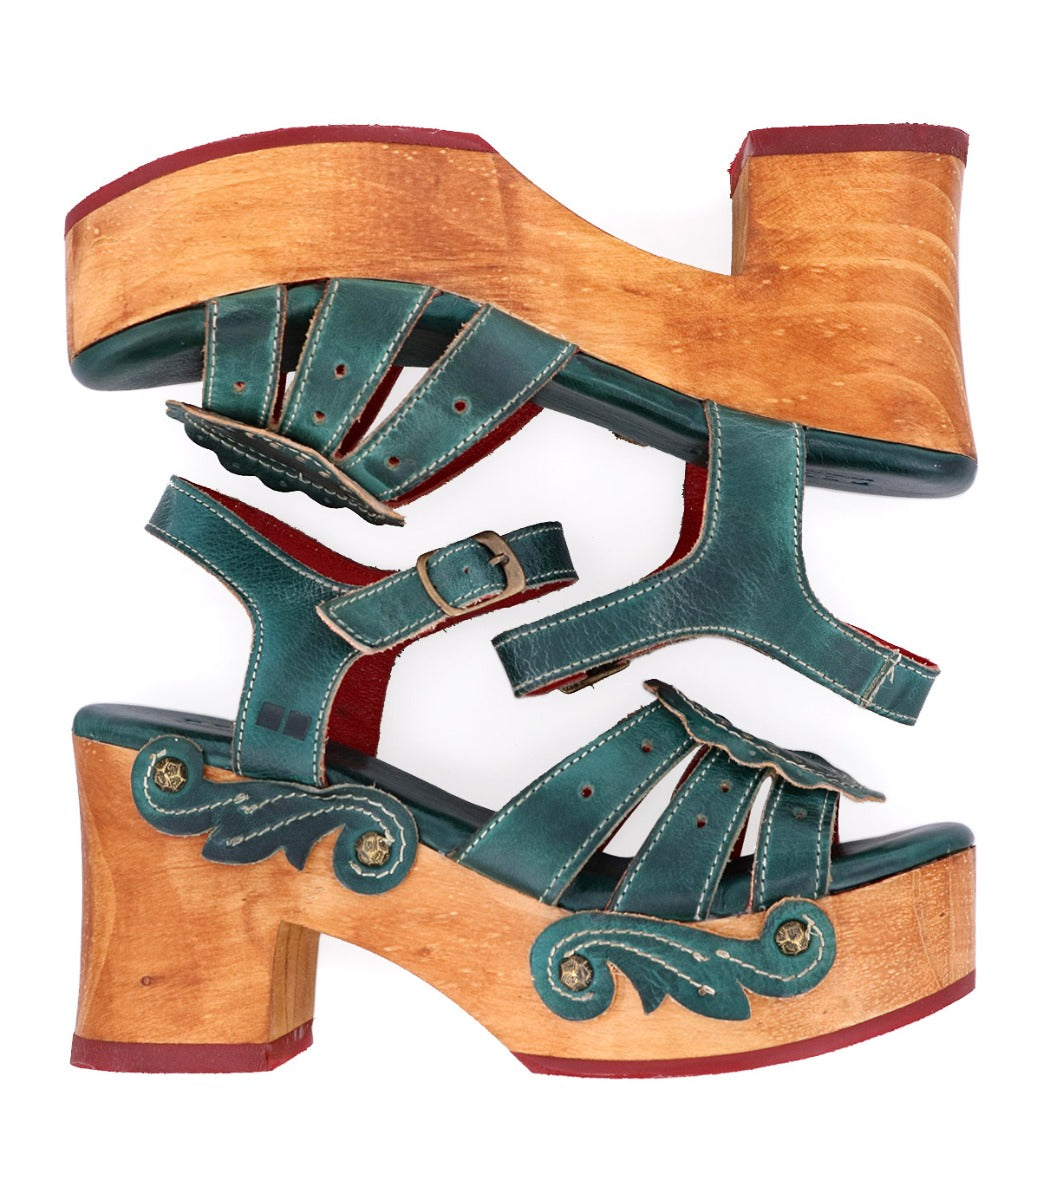 A pair of green wooden Sabine sandals with a Bed Stu wooden heel.